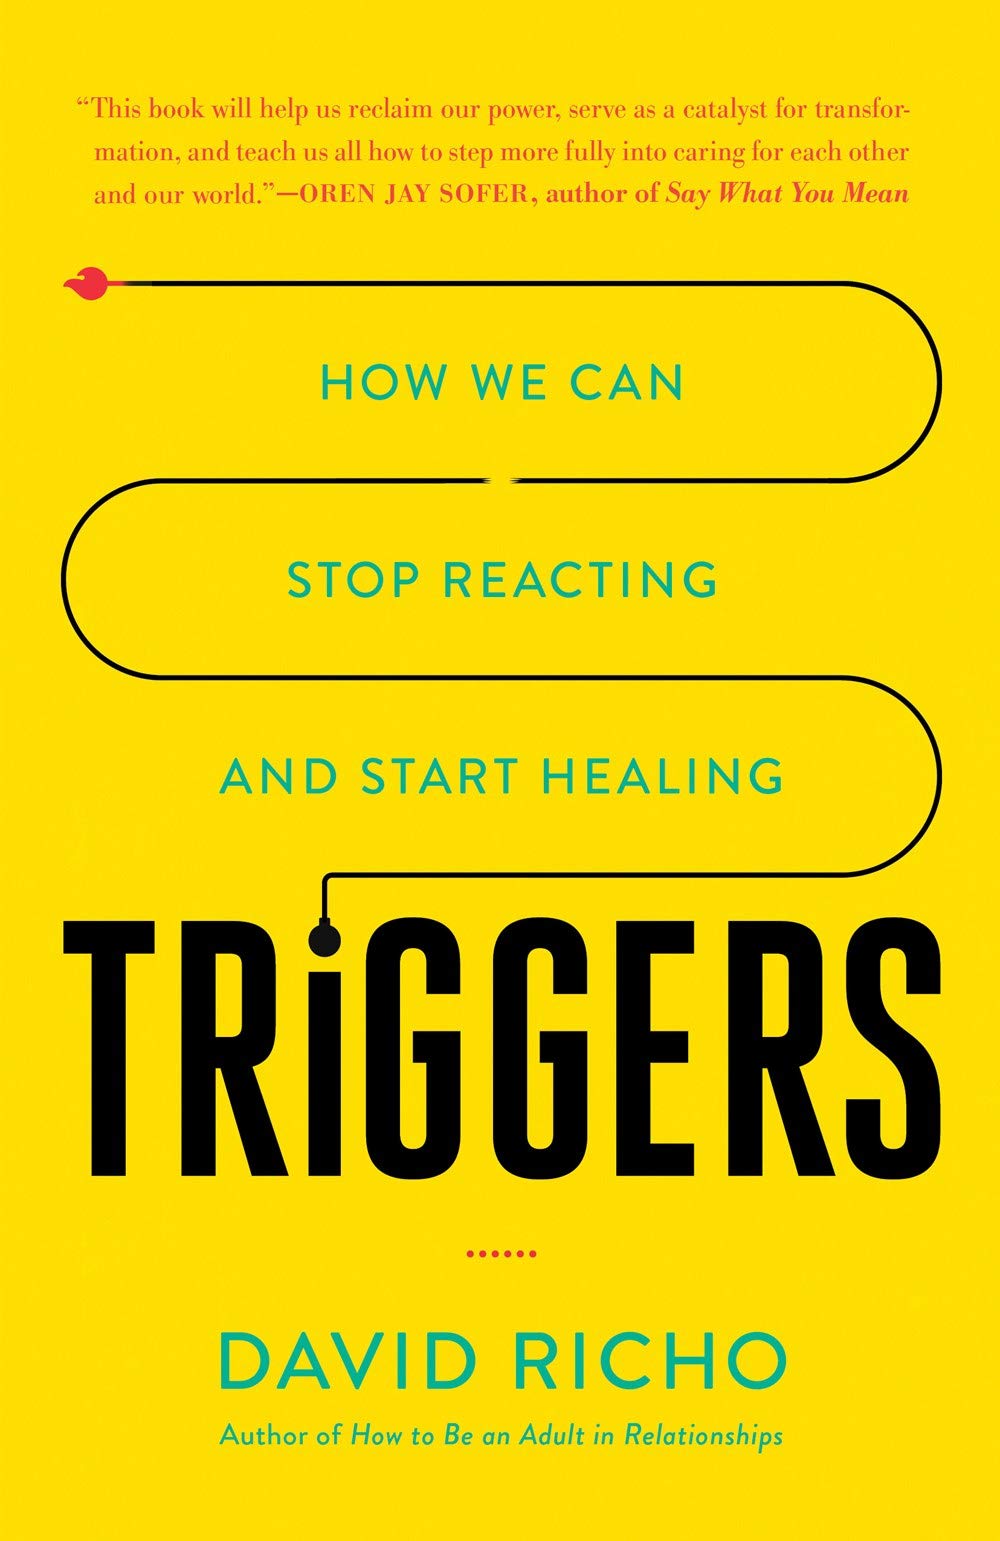 Triggers: How We can Stop Reacting And Start Healing